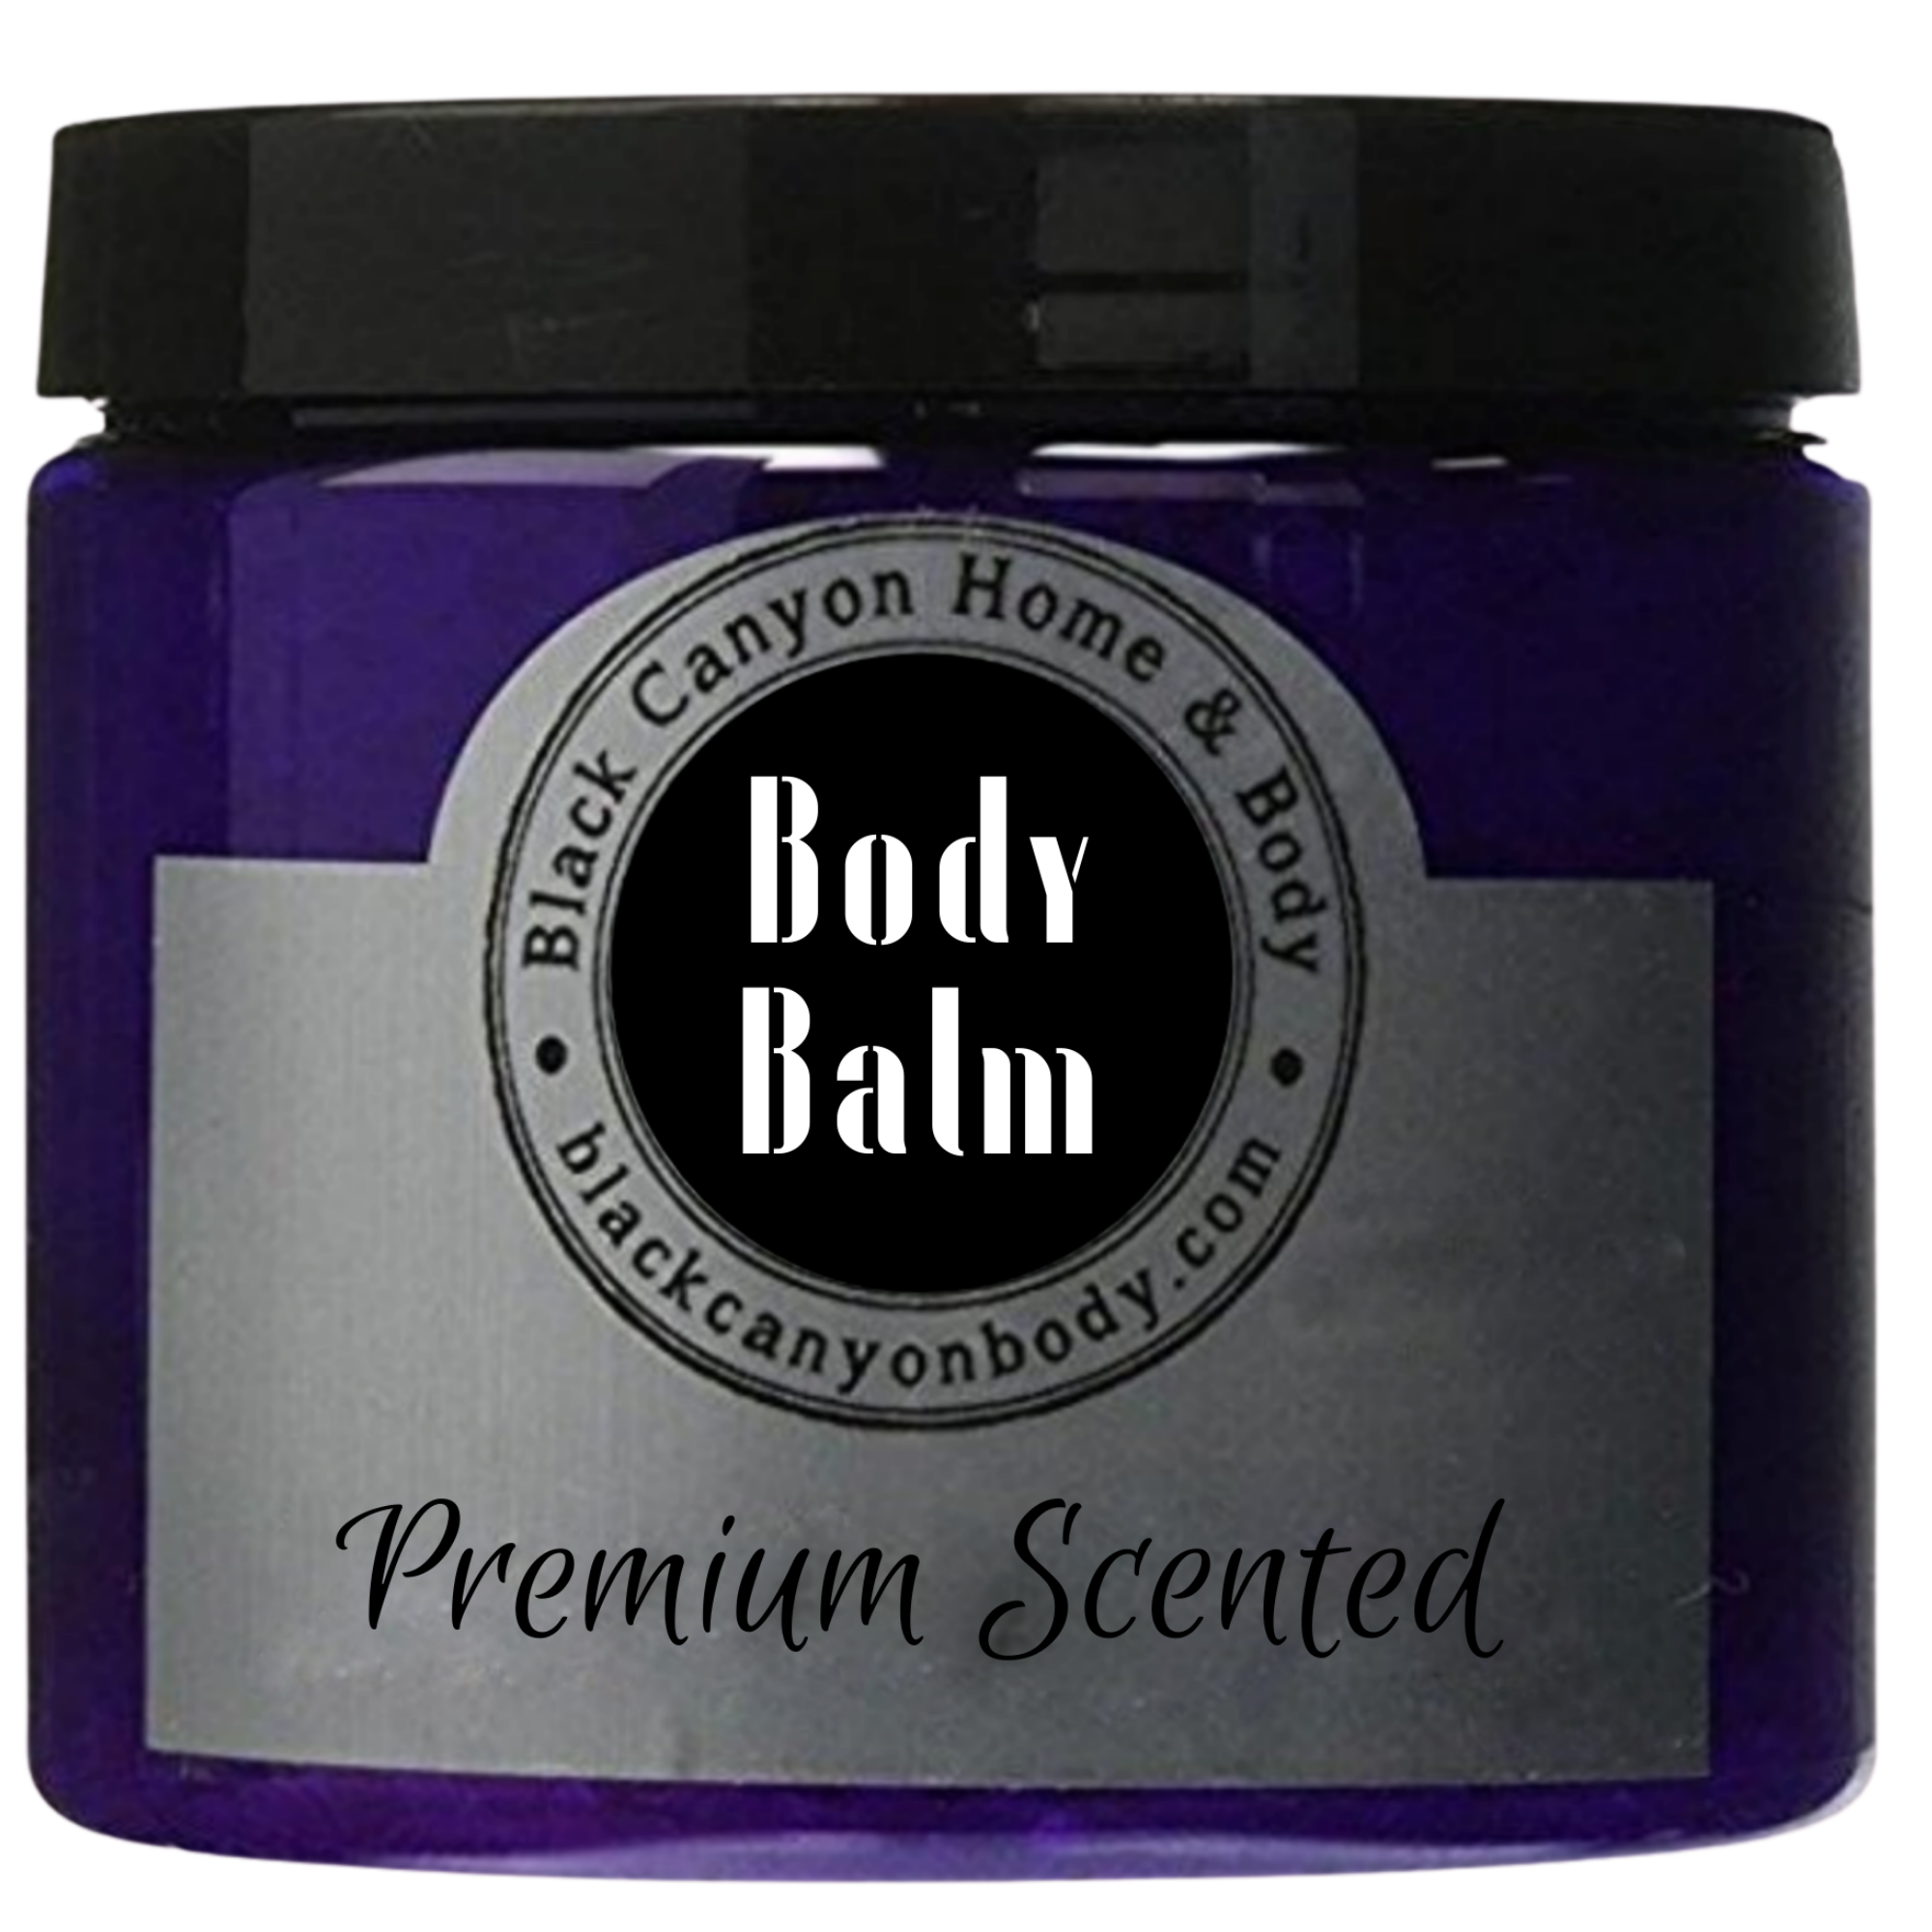 Black Canyon Black Currant & Sandalwood Scented Natural Body Balm with Shea